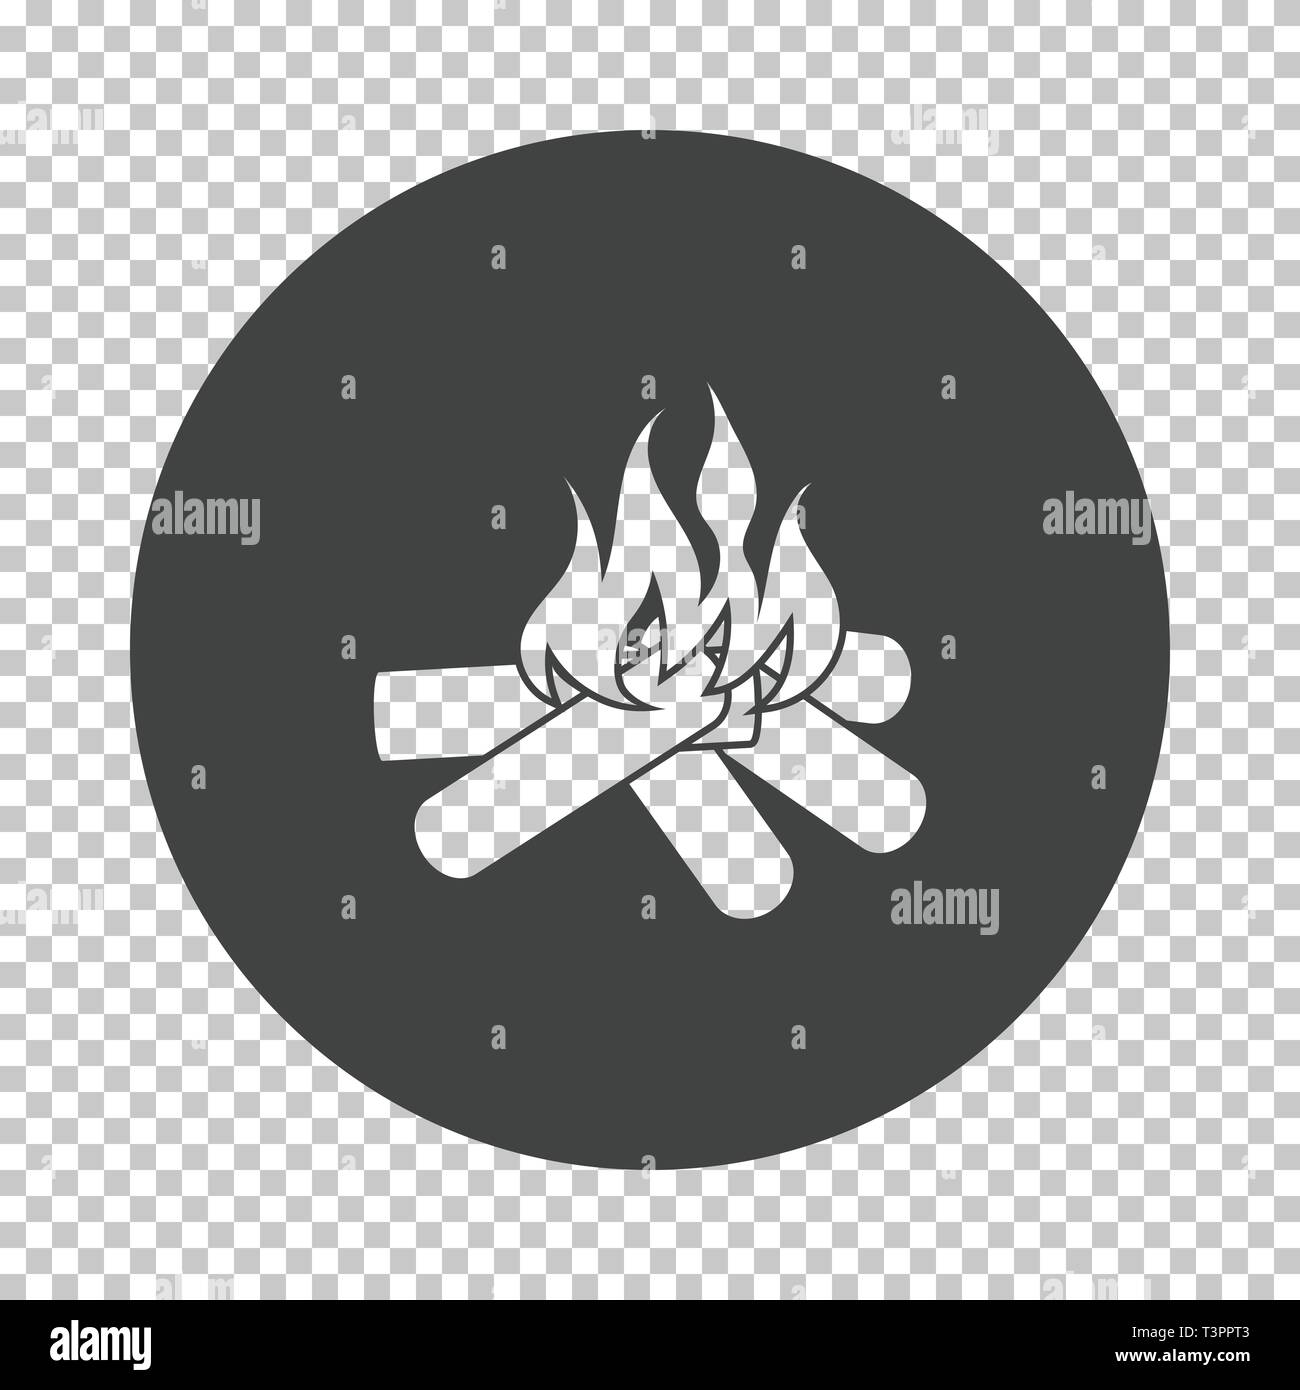 Camping fire  icon. Subtract stencil design on tranparency grid. Vector illustration. Stock Vector